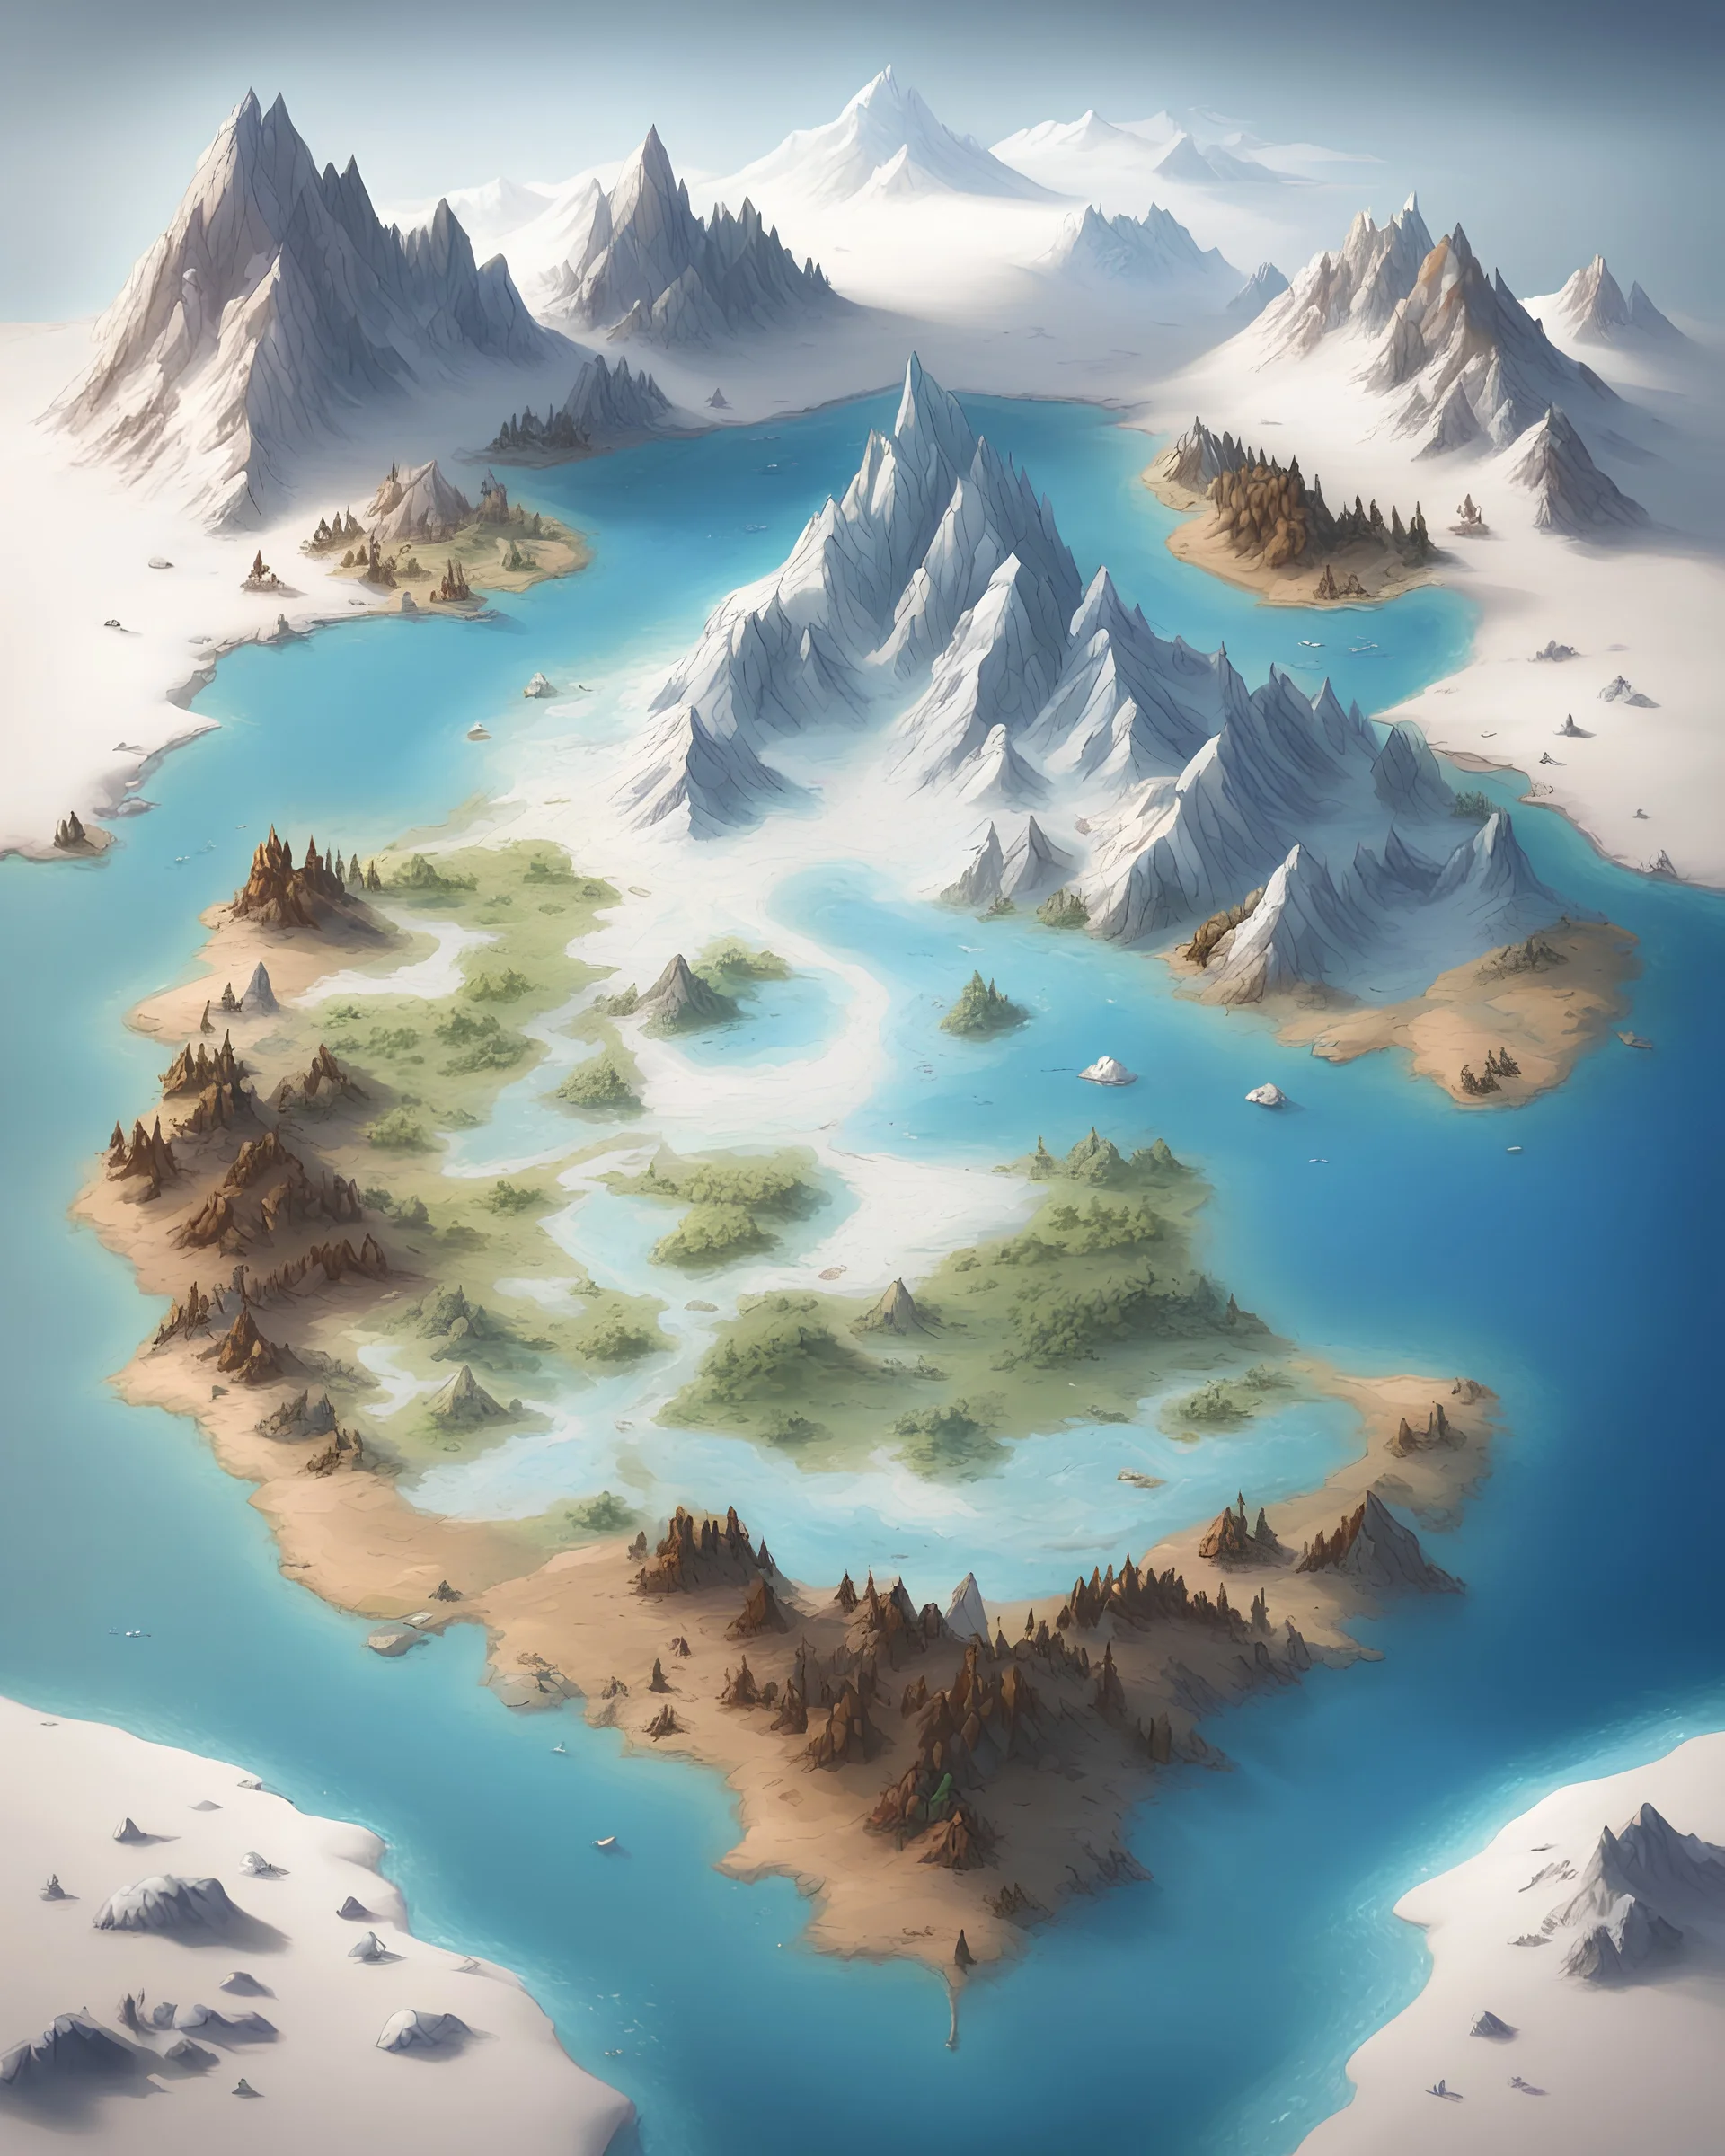 A fantasy map of an island with 3 different climates; desert, snow and forest. Include a mountain in the snow climate and a lake in the middle of the island.